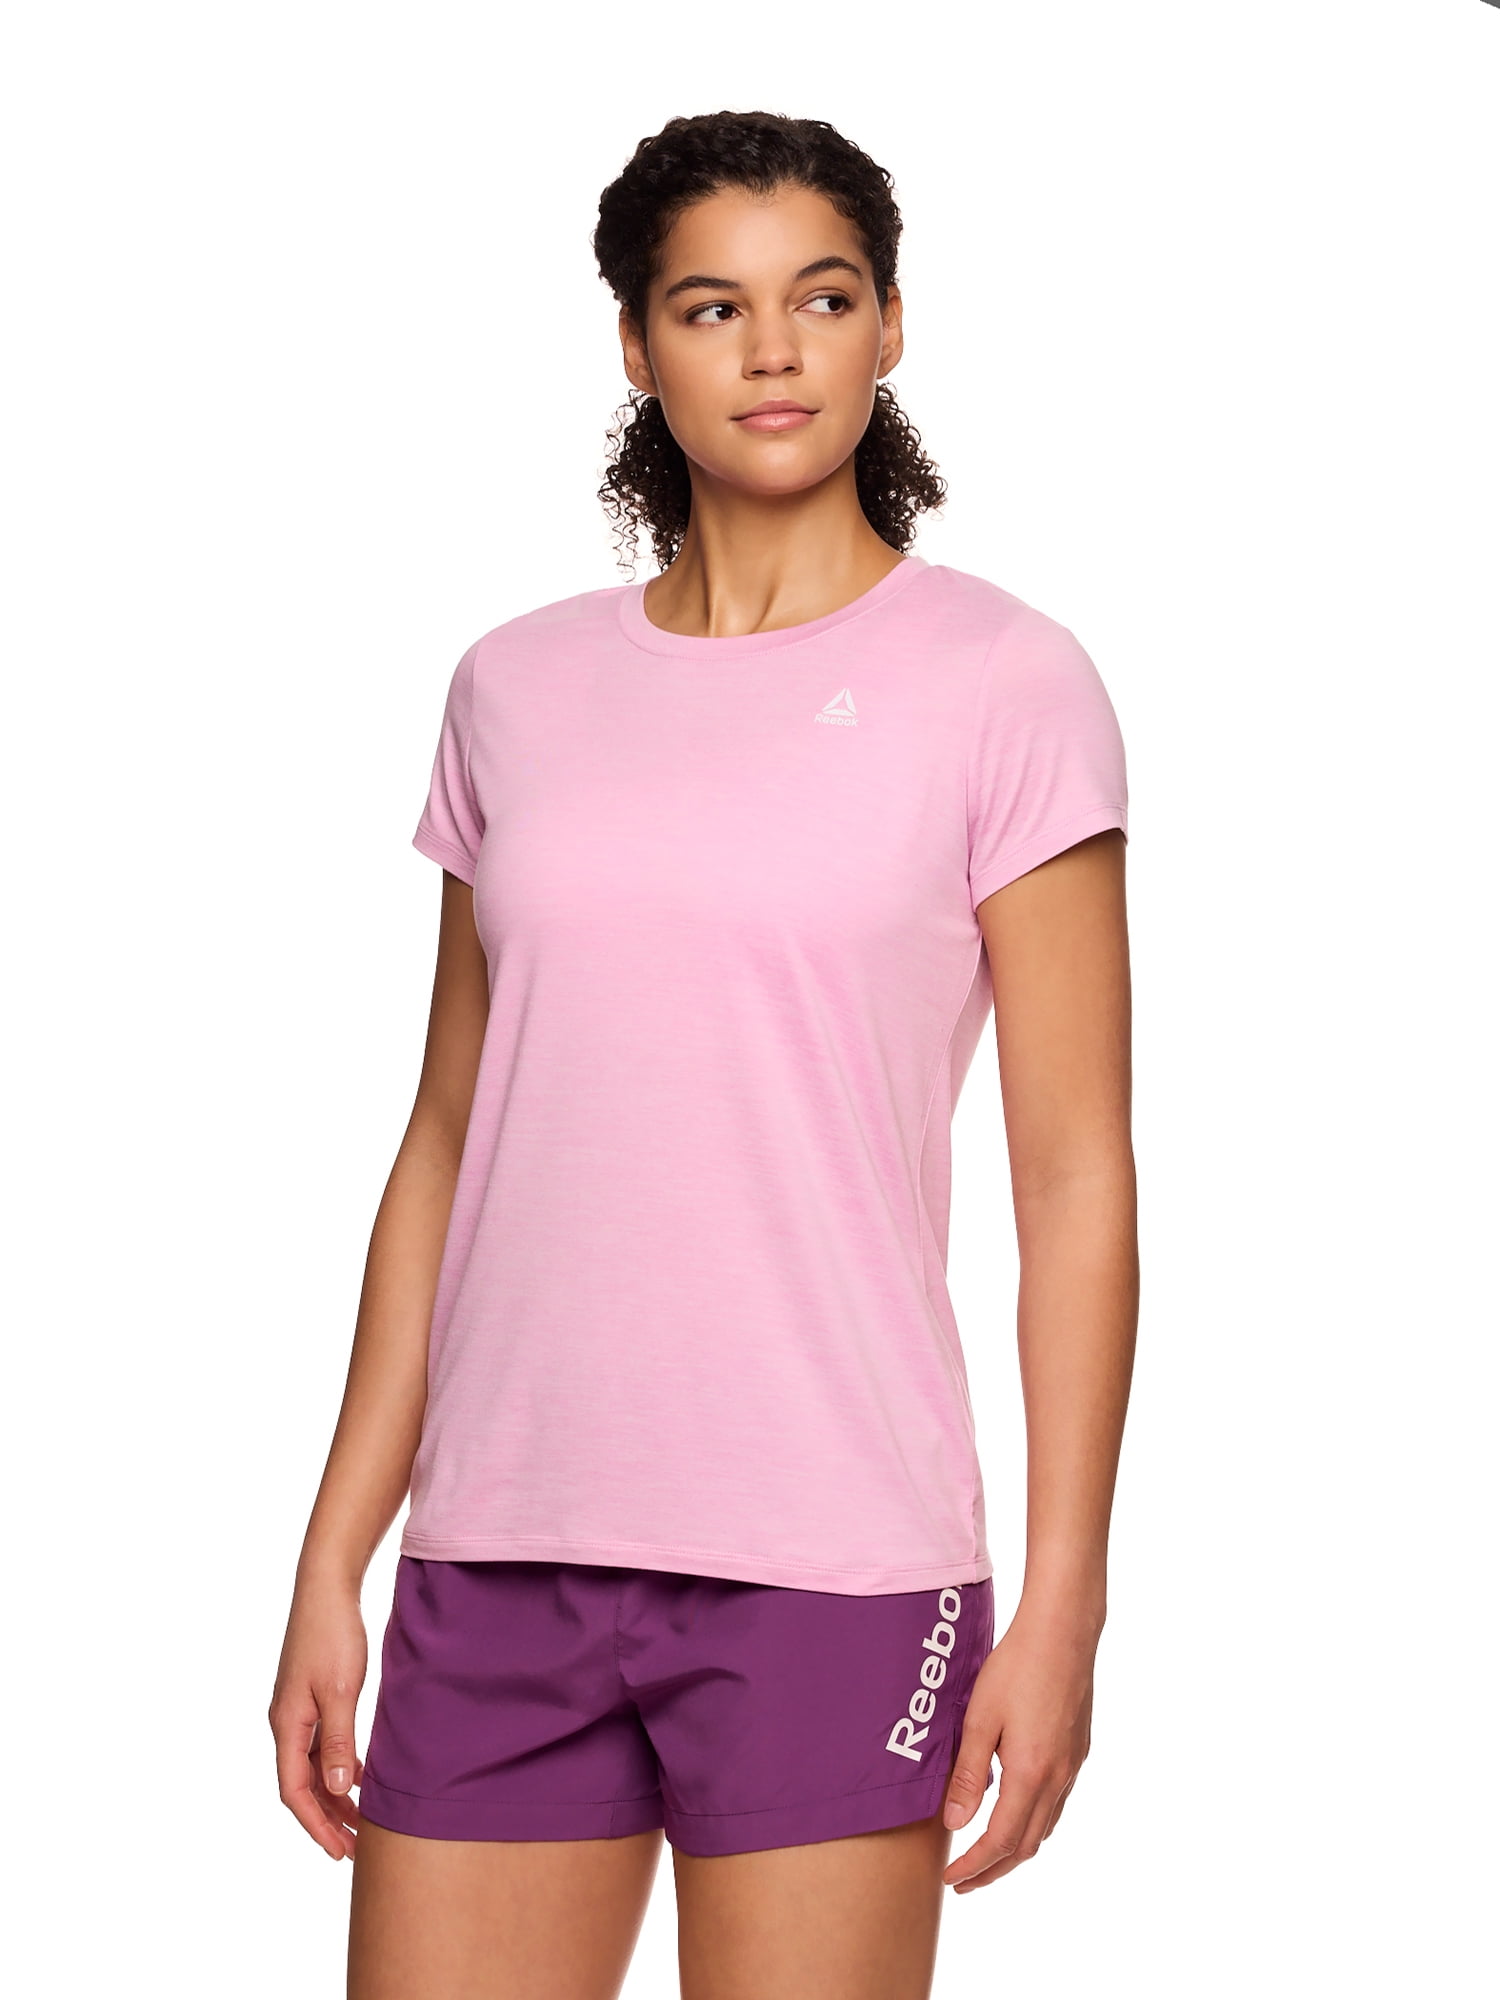 Reebok Women's Legacy Performance T-Shirt with Short Sleeves, Sizes XS ...